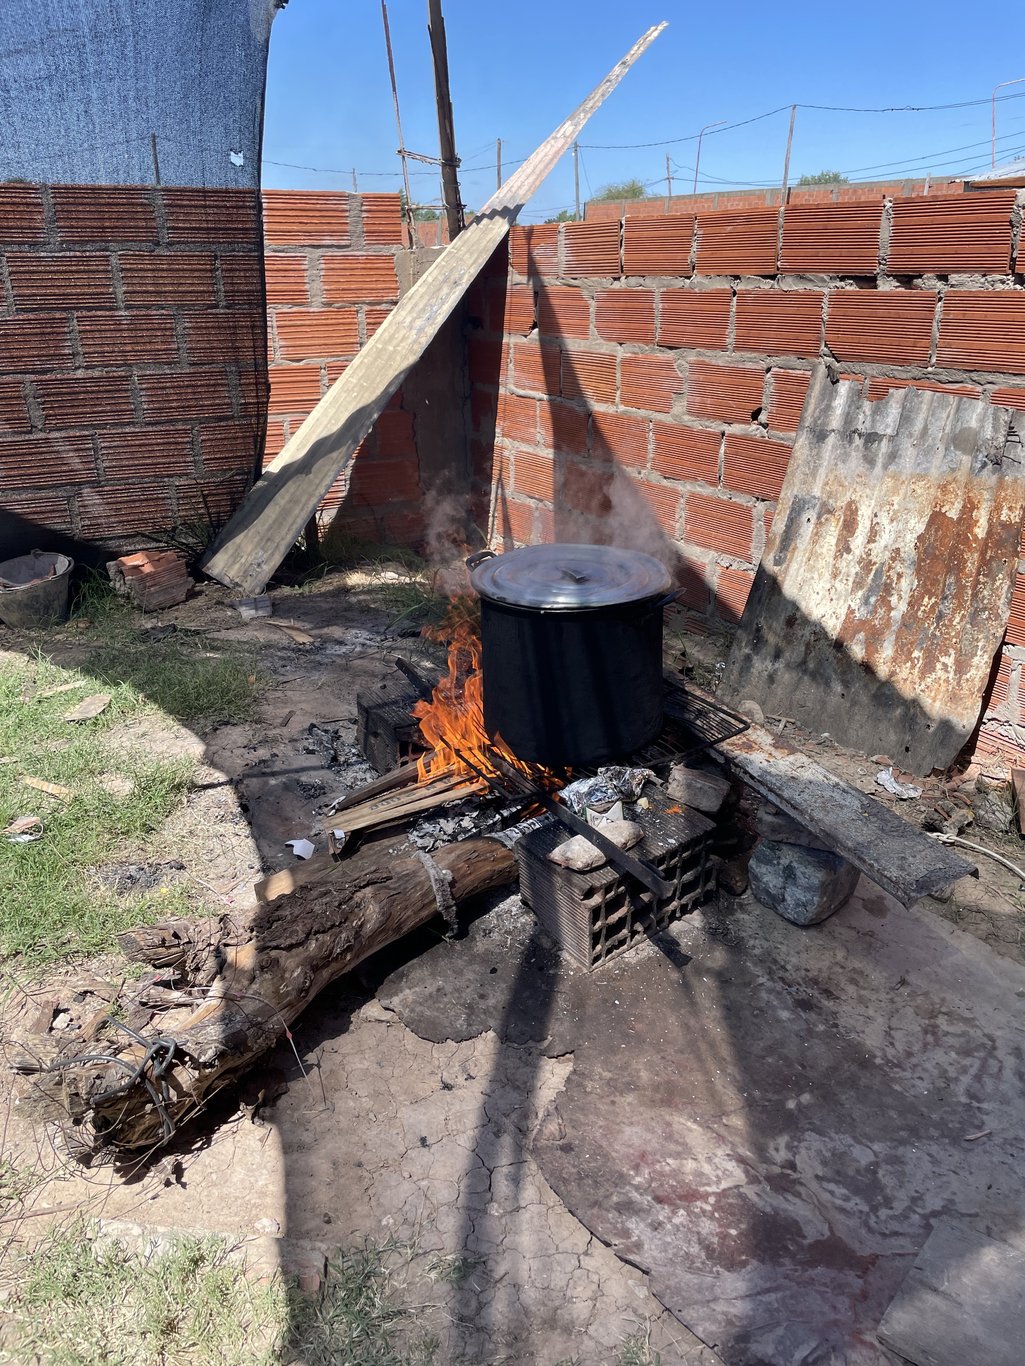 Wood-burning cooker in the Sector 3 common pot, in Villa Unión settlement